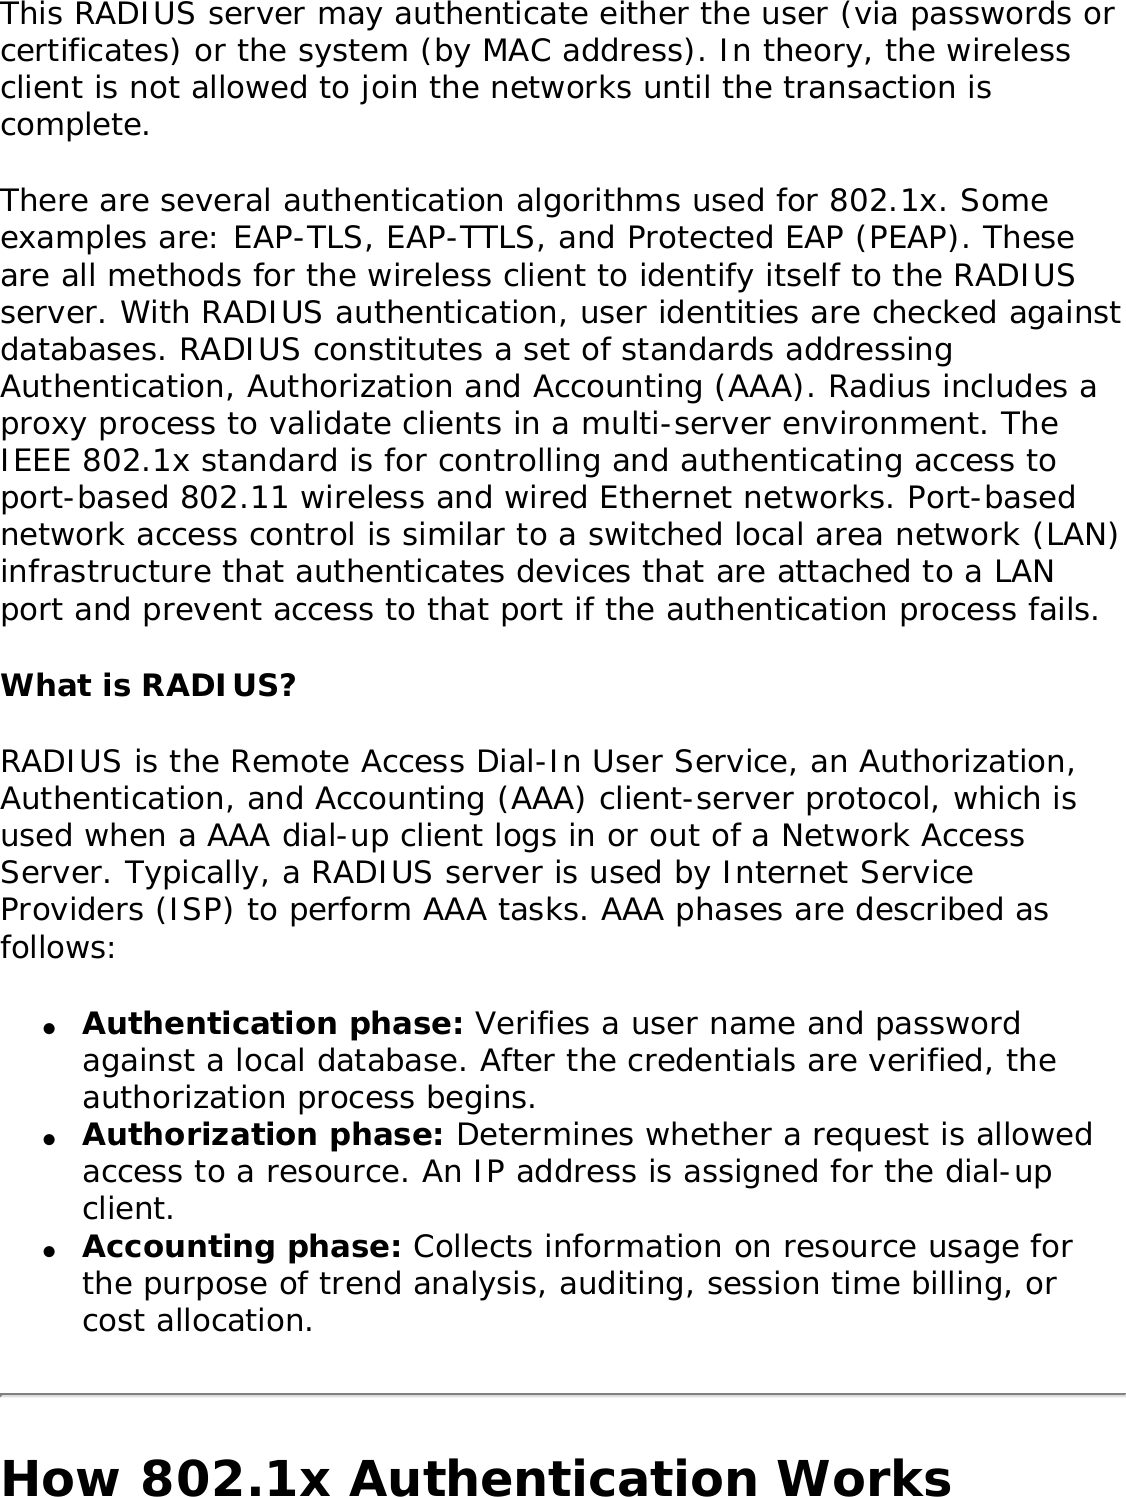 This RADIUS server may authenticate either the user (via passwords or certificates) or the system (by MAC address). In theory, the wireless client is not allowed to join the networks until the transaction is complete. There are several authentication algorithms used for 802.1x. Some examples are: EAP-TLS, EAP-TTLS, and Protected EAP (PEAP). These are all methods for the wireless client to identify itself to the RADIUS server. With RADIUS authentication, user identities are checked against databases. RADIUS constitutes a set of standards addressing Authentication, Authorization and Accounting (AAA). Radius includes a proxy process to validate clients in a multi-server environment. The IEEE 802.1x standard is for controlling and authenticating access to port-based 802.11 wireless and wired Ethernet networks. Port-based network access control is similar to a switched local area network (LAN) infrastructure that authenticates devices that are attached to a LAN port and prevent access to that port if the authentication process fails. What is RADIUS?RADIUS is the Remote Access Dial-In User Service, an Authorization, Authentication, and Accounting (AAA) client-server protocol, which is used when a AAA dial-up client logs in or out of a Network Access Server. Typically, a RADIUS server is used by Internet Service Providers (ISP) to perform AAA tasks. AAA phases are described as follows: ●     Authentication phase: Verifies a user name and password against a local database. After the credentials are verified, the authorization process begins. ●     Authorization phase: Determines whether a request is allowed access to a resource. An IP address is assigned for the dial-up client. ●     Accounting phase: Collects information on resource usage for the purpose of trend analysis, auditing, session time billing, or cost allocation. How 802.1x Authentication Works